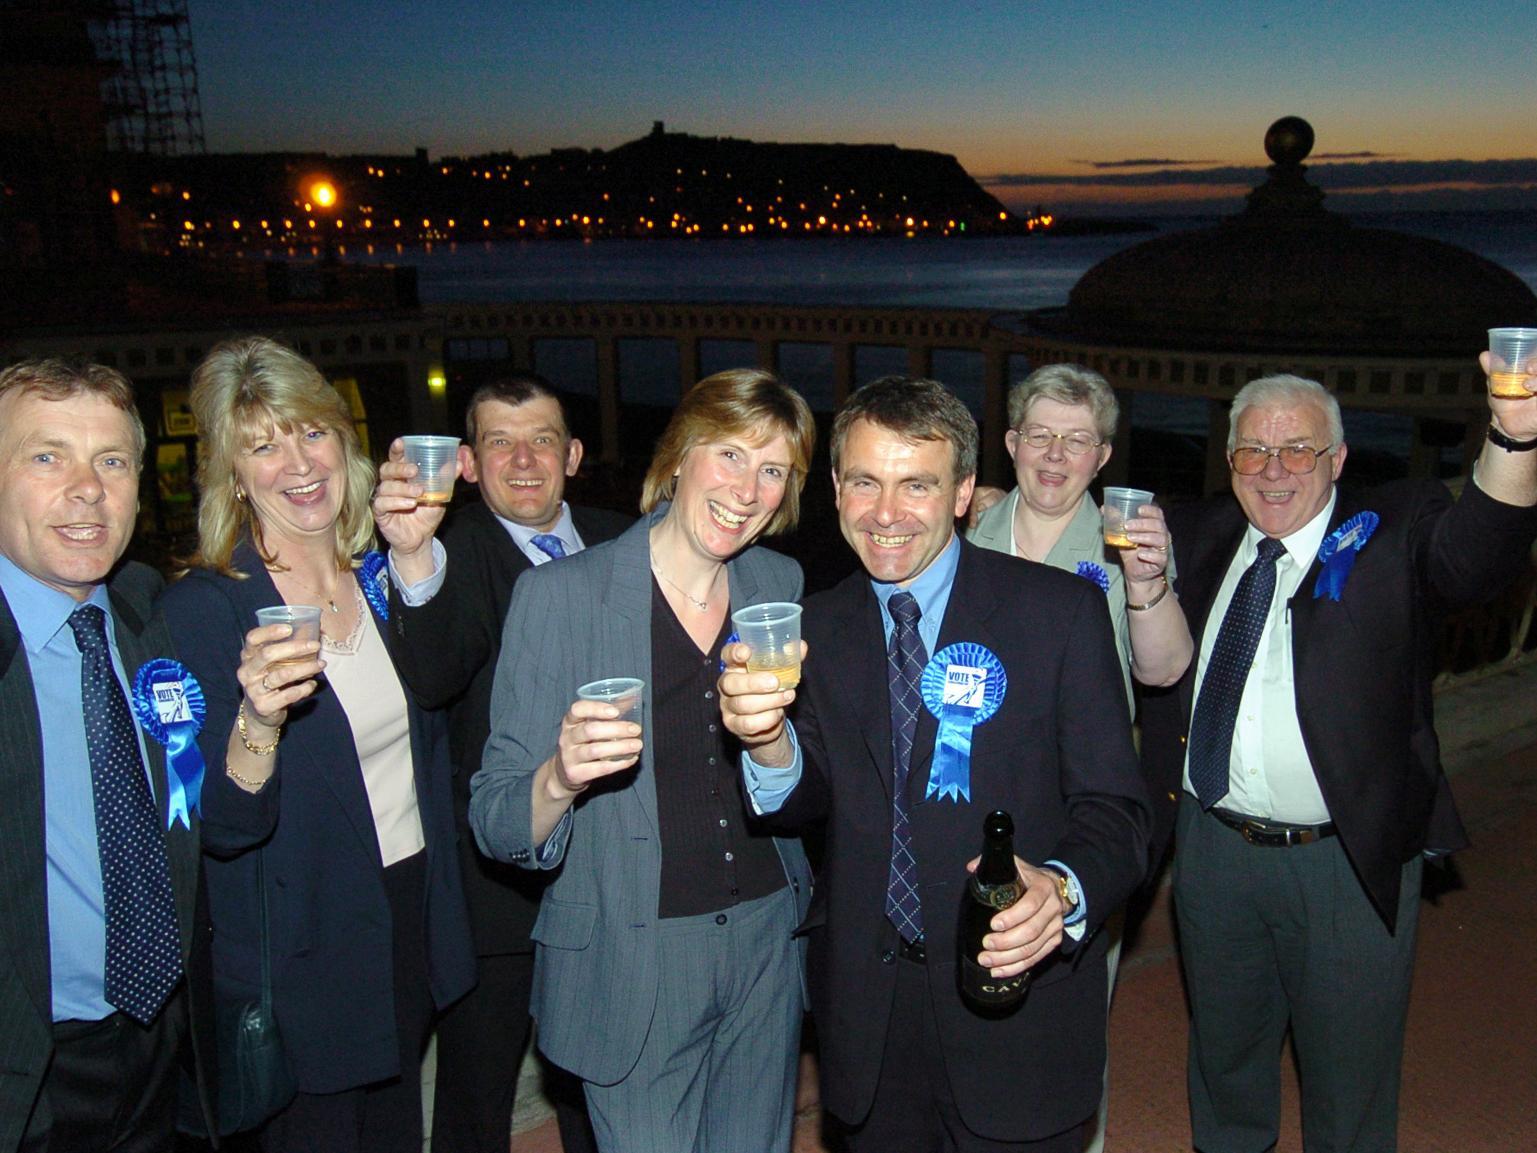 Robert Goodwill celebrates victory with his team after becoming MP for the first time.